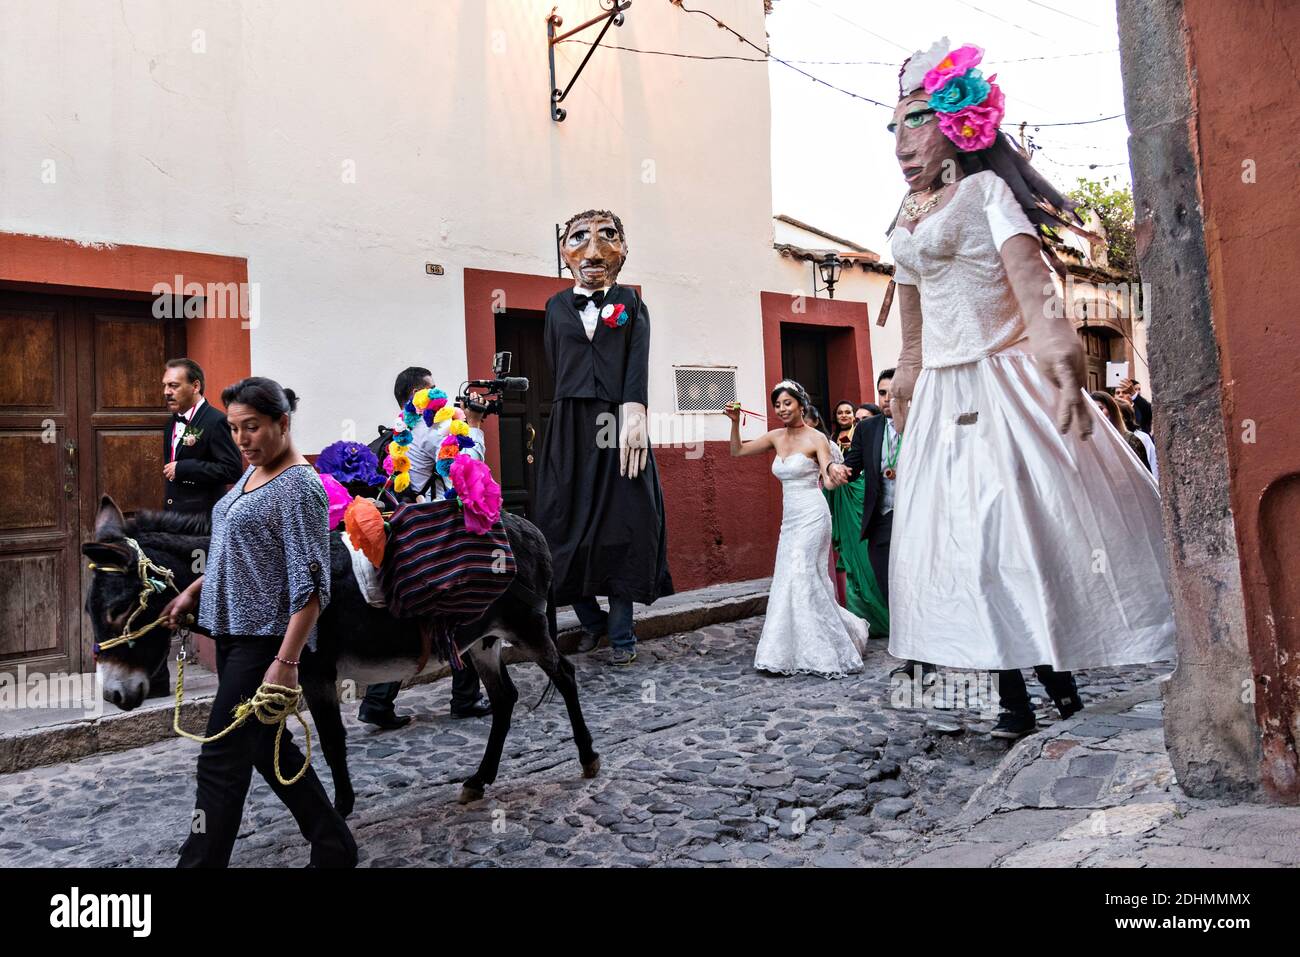 A decorated donkey leads the way as giant puppets called mojigangas dance during a wedding celebration parading through the streets San Miguel de Allende, Guanajuato, Mexico. Stock Photo